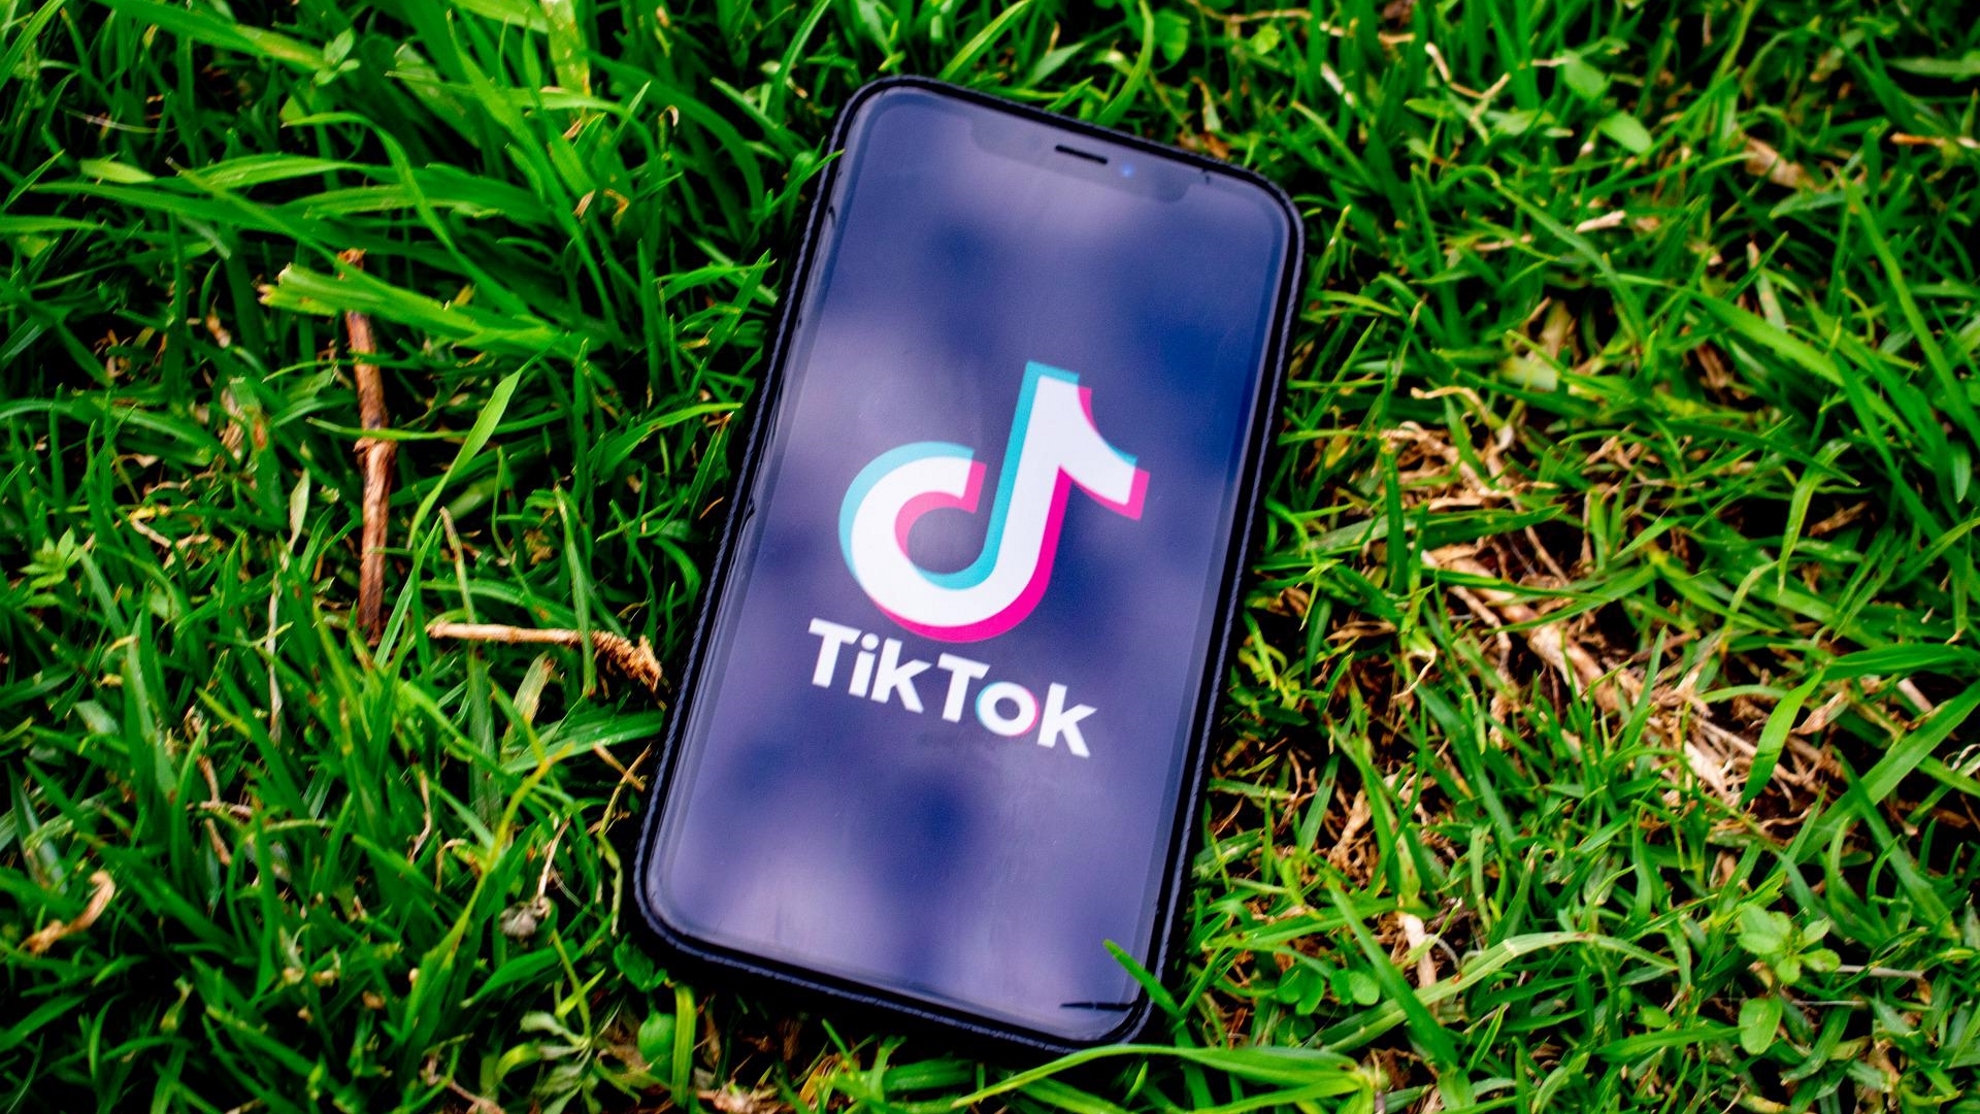 US commissioner warns: TikTok is a wolf in sheep's clothing